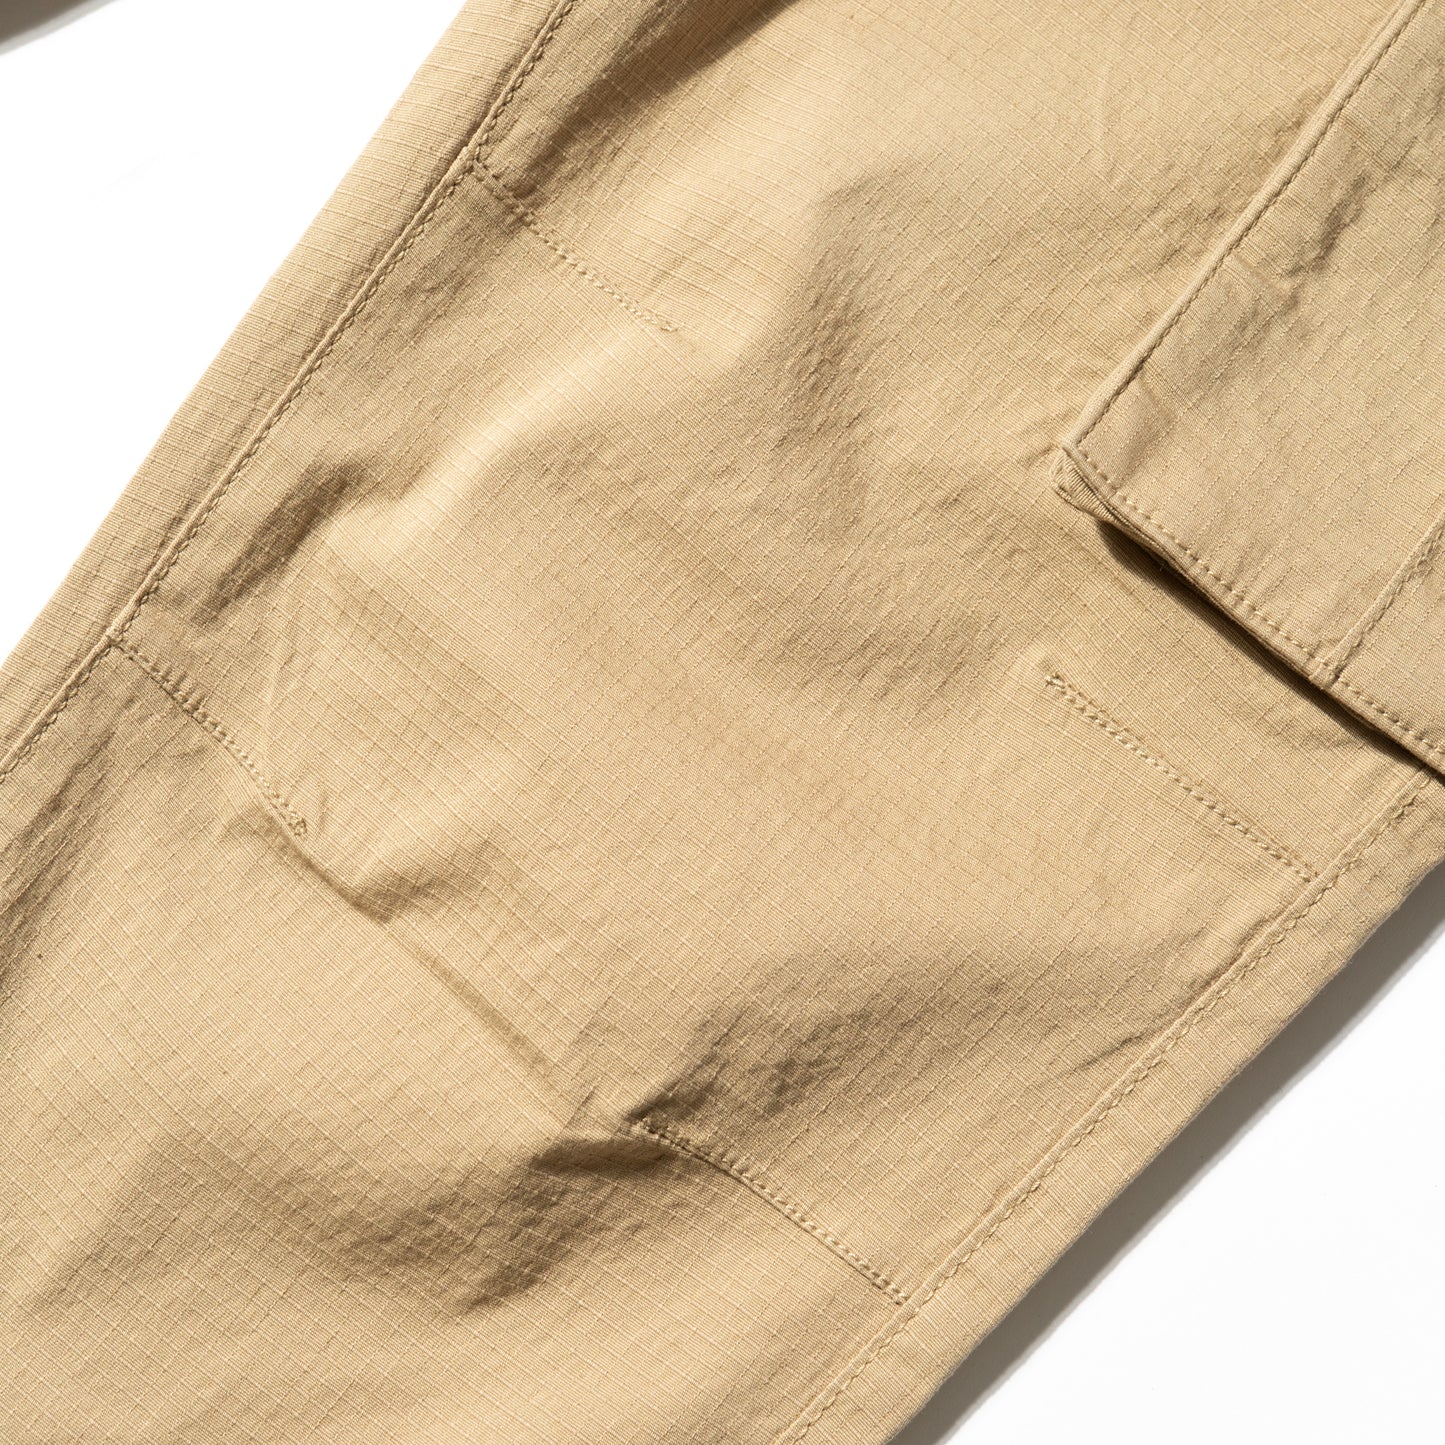 Rip Twill ripstop Cargo Pant  (Sand)